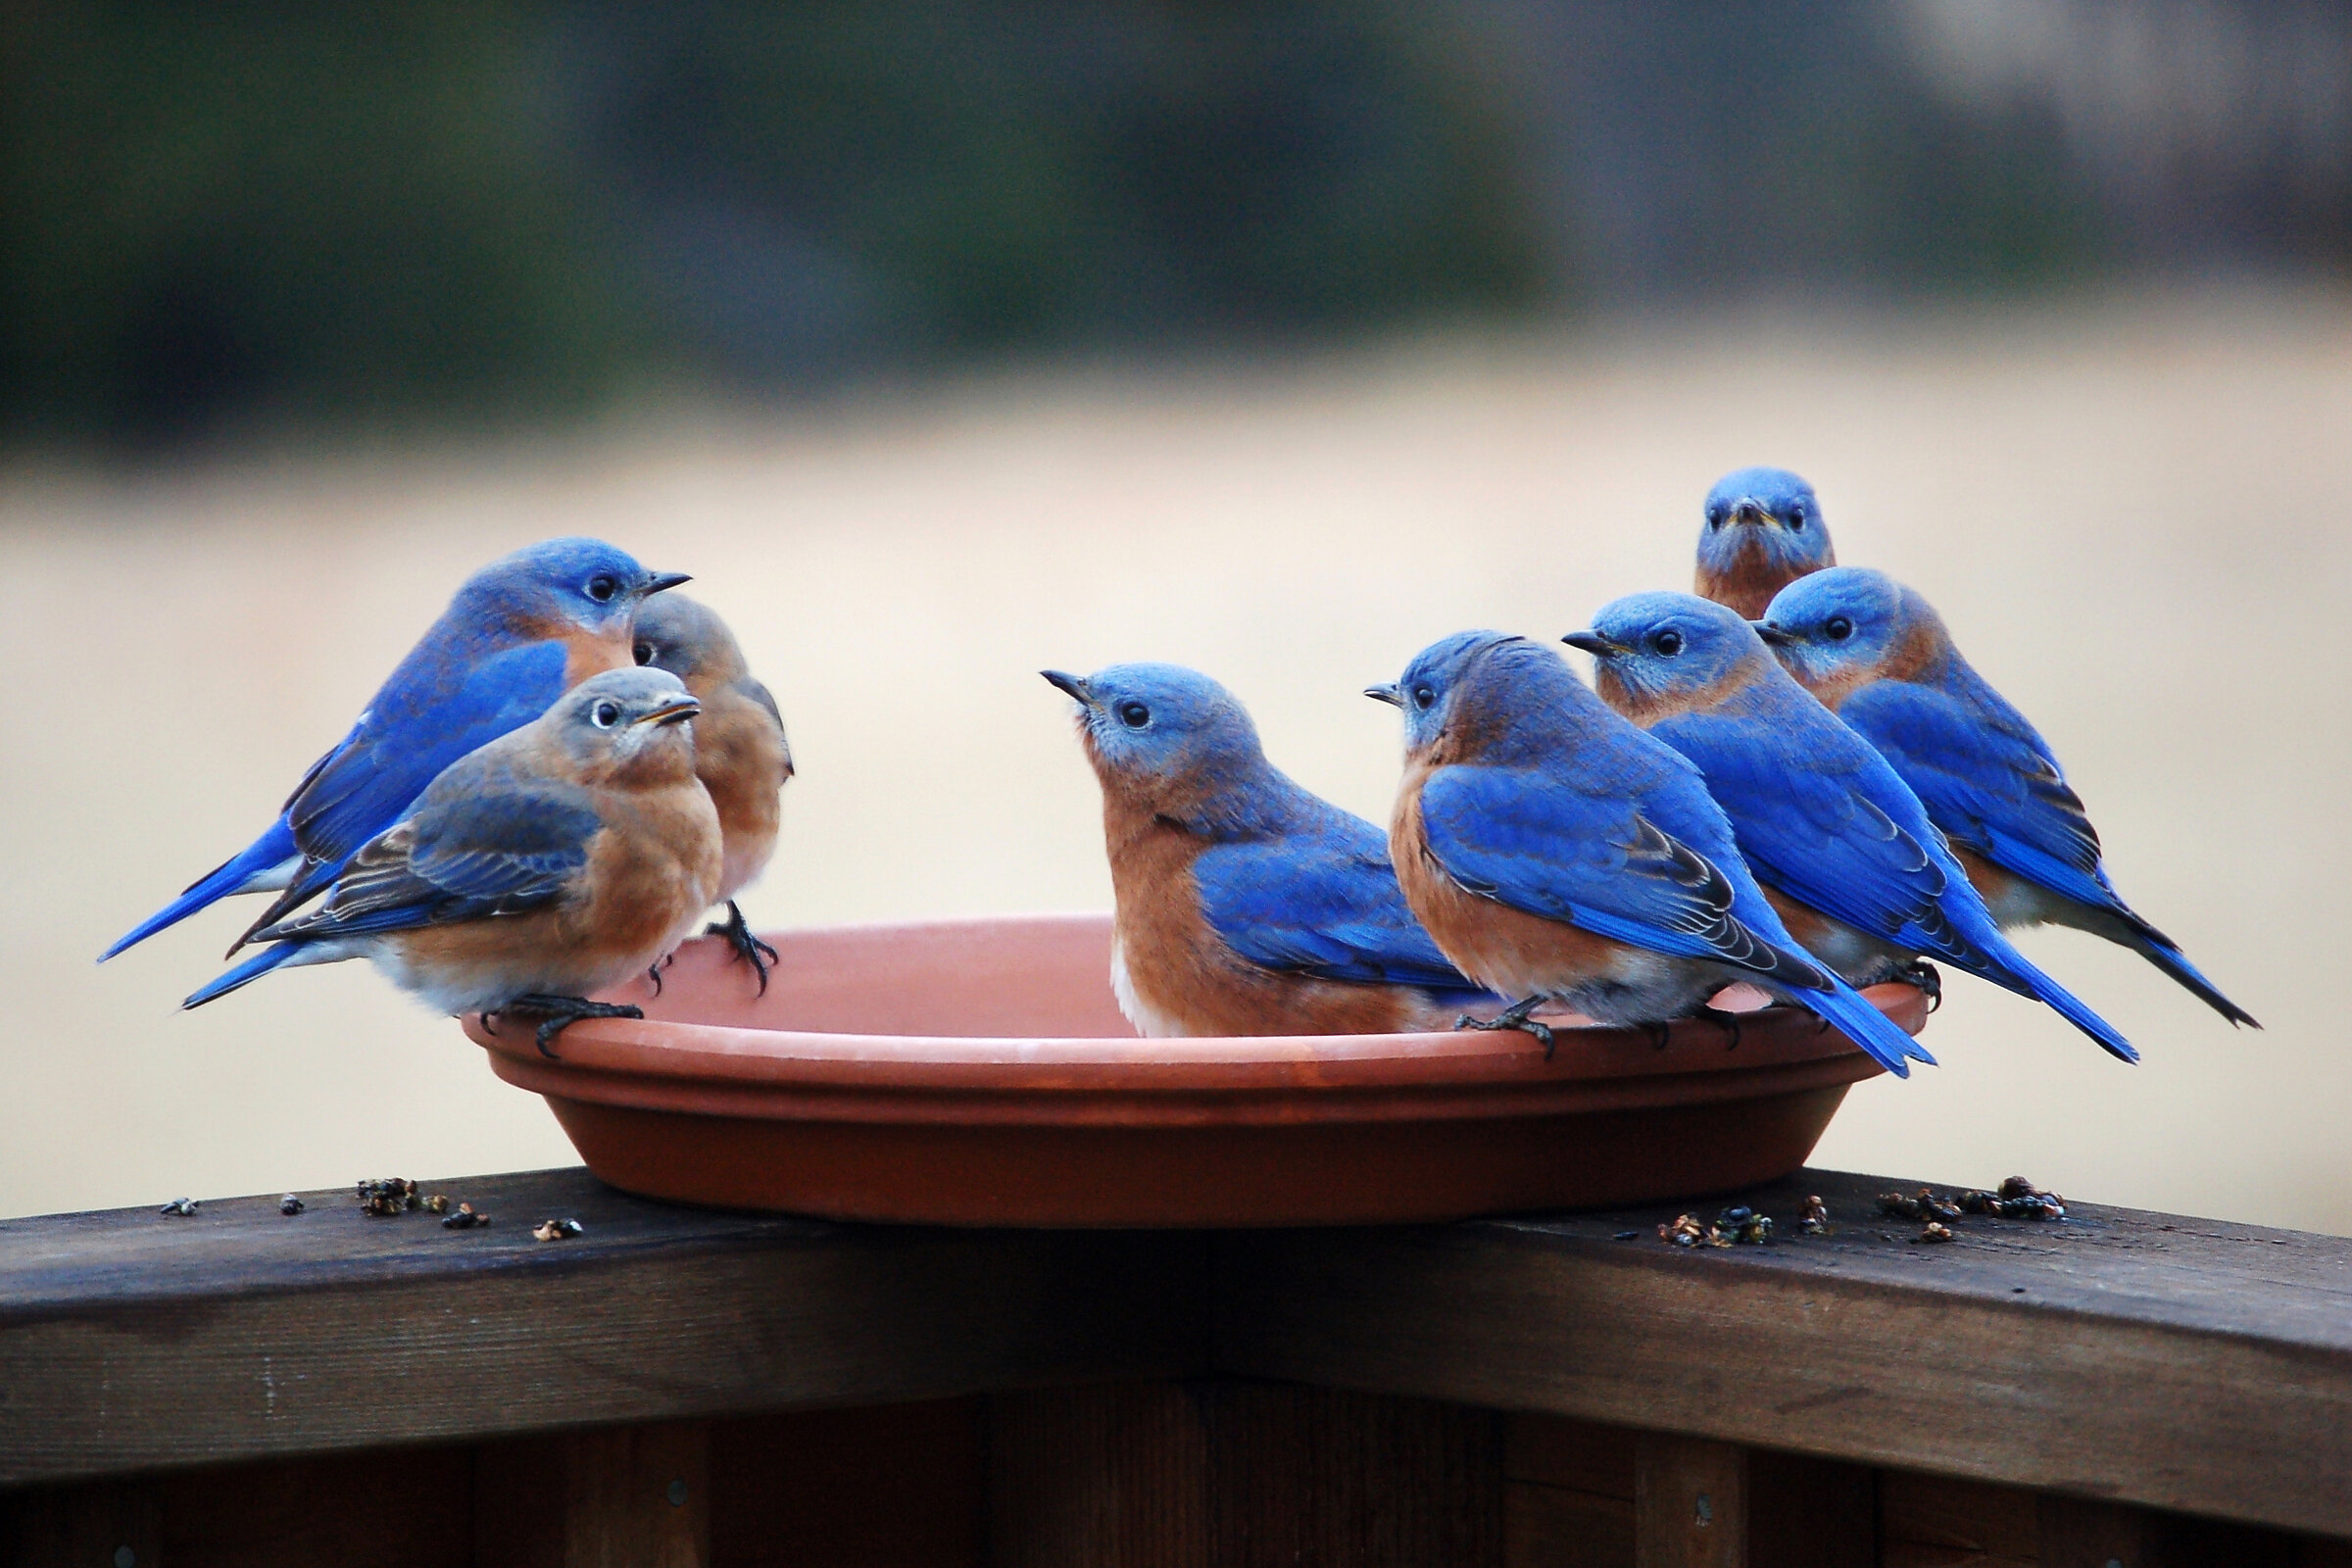 Several Eastern Bluebirds are perched around a warm-red water dish on a wooden handrail. 